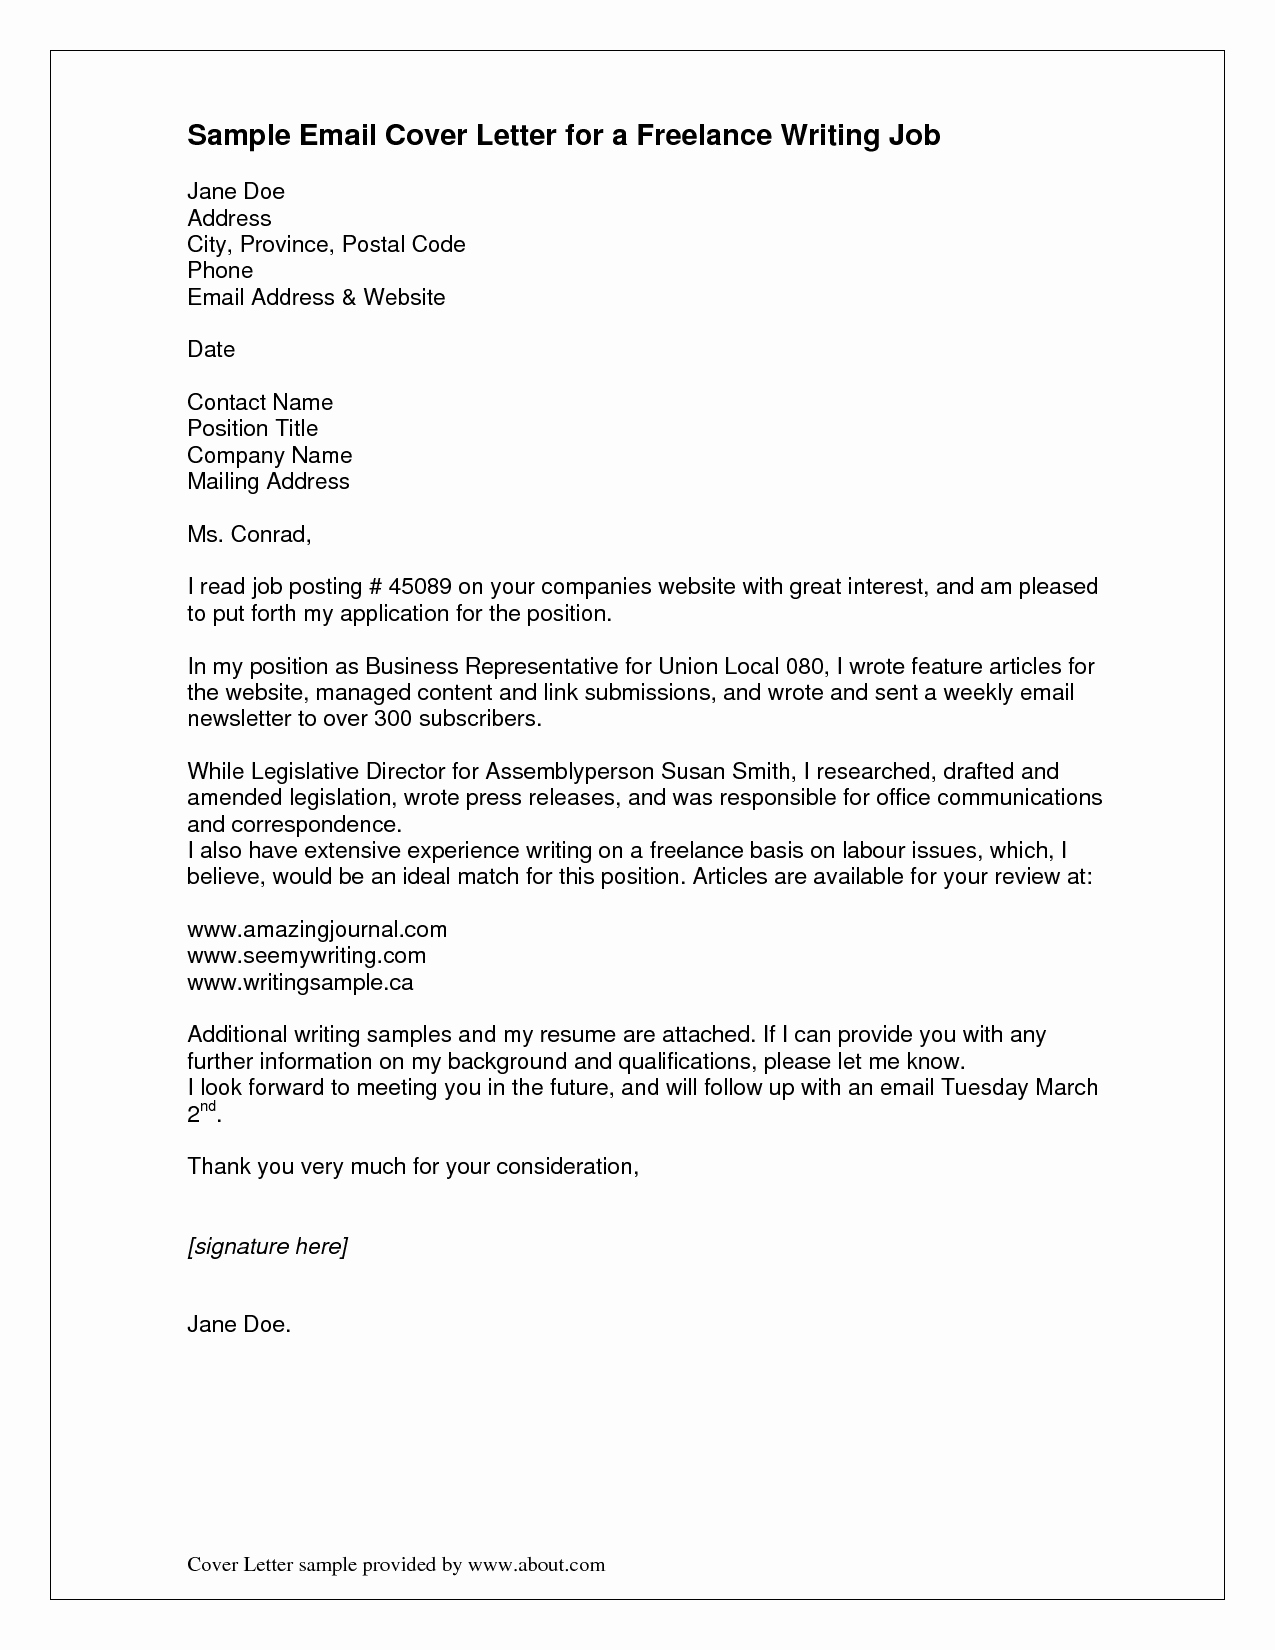 Samples Of Email Cover Letters Fresh Email Cover Letter Sample